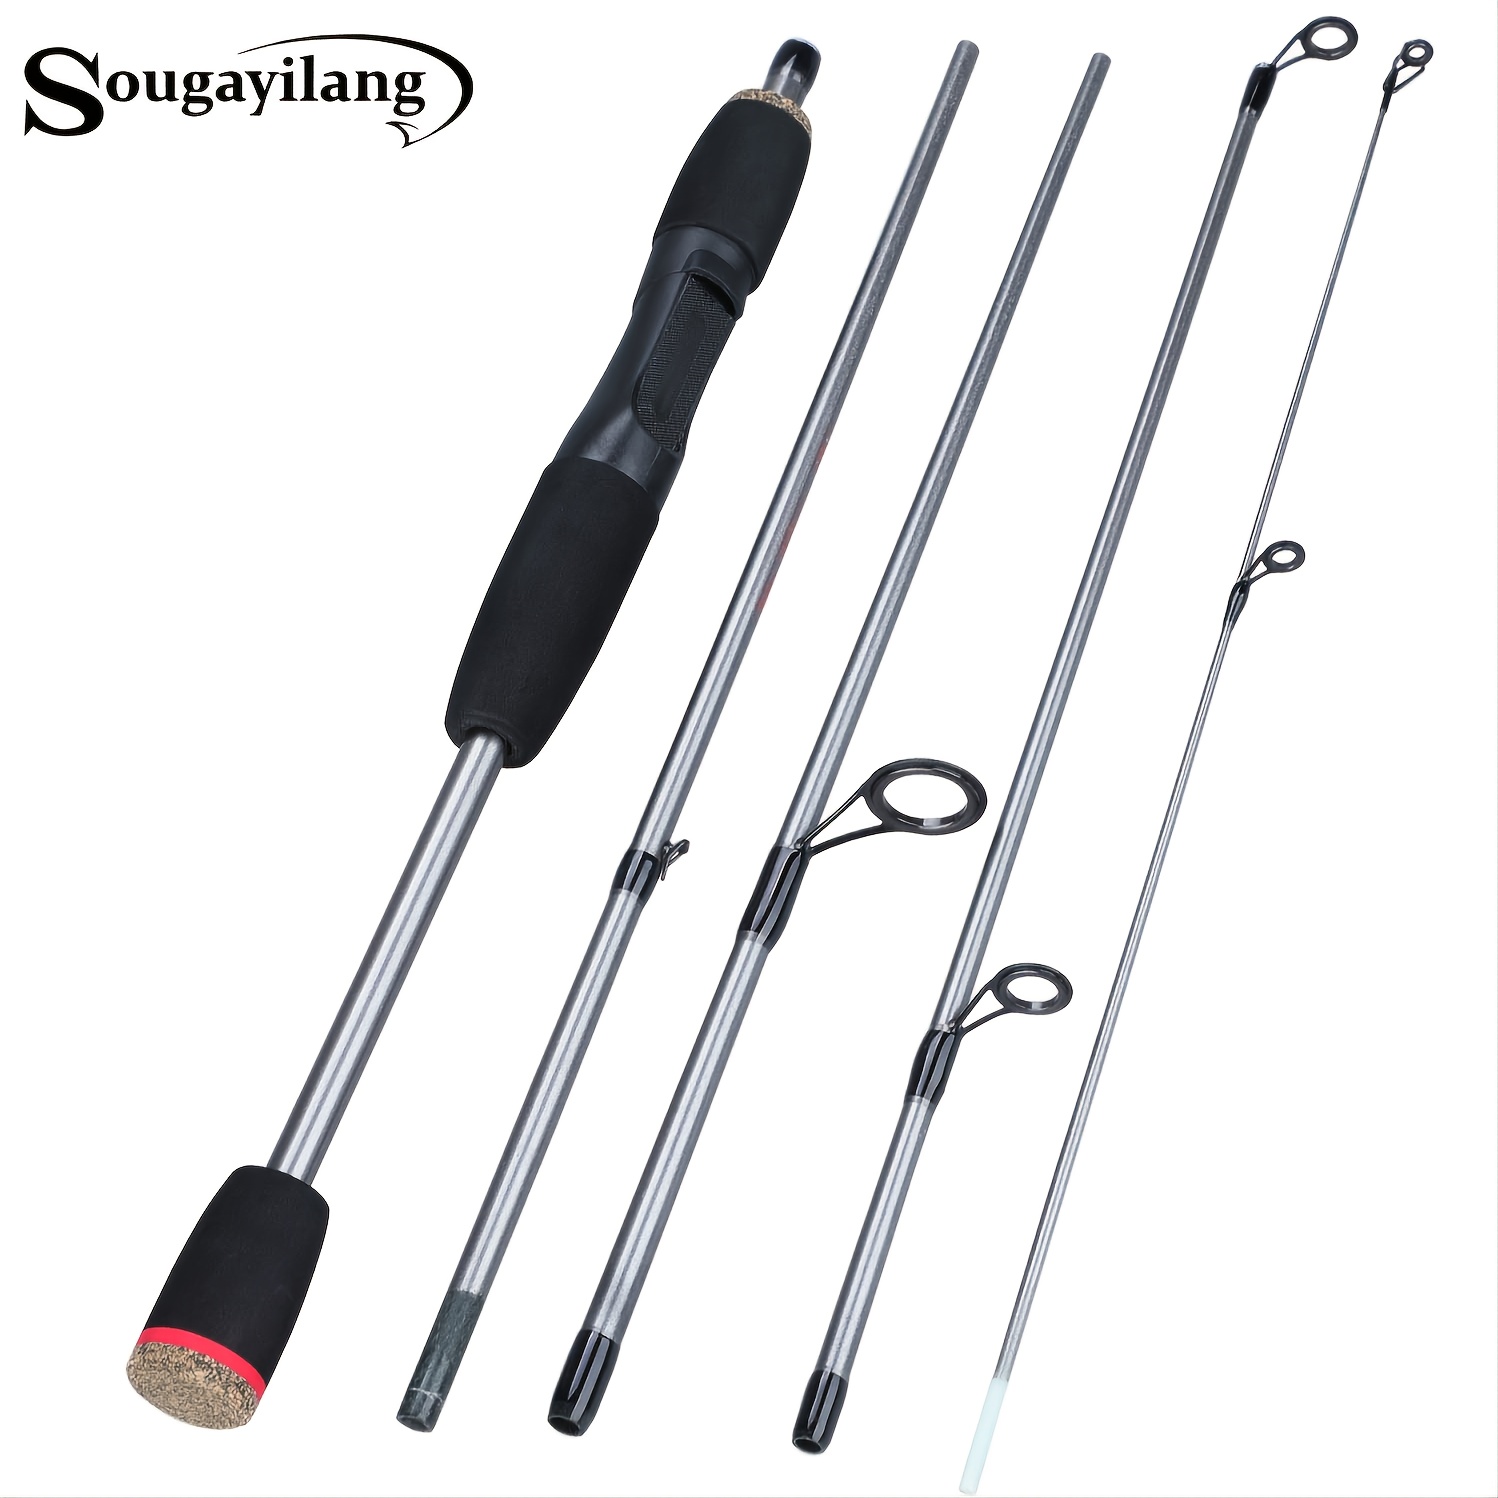 Sougayilang 5-Section Pinning Fishing Rod - Get Ready for Your Next Fishing  Adventure!